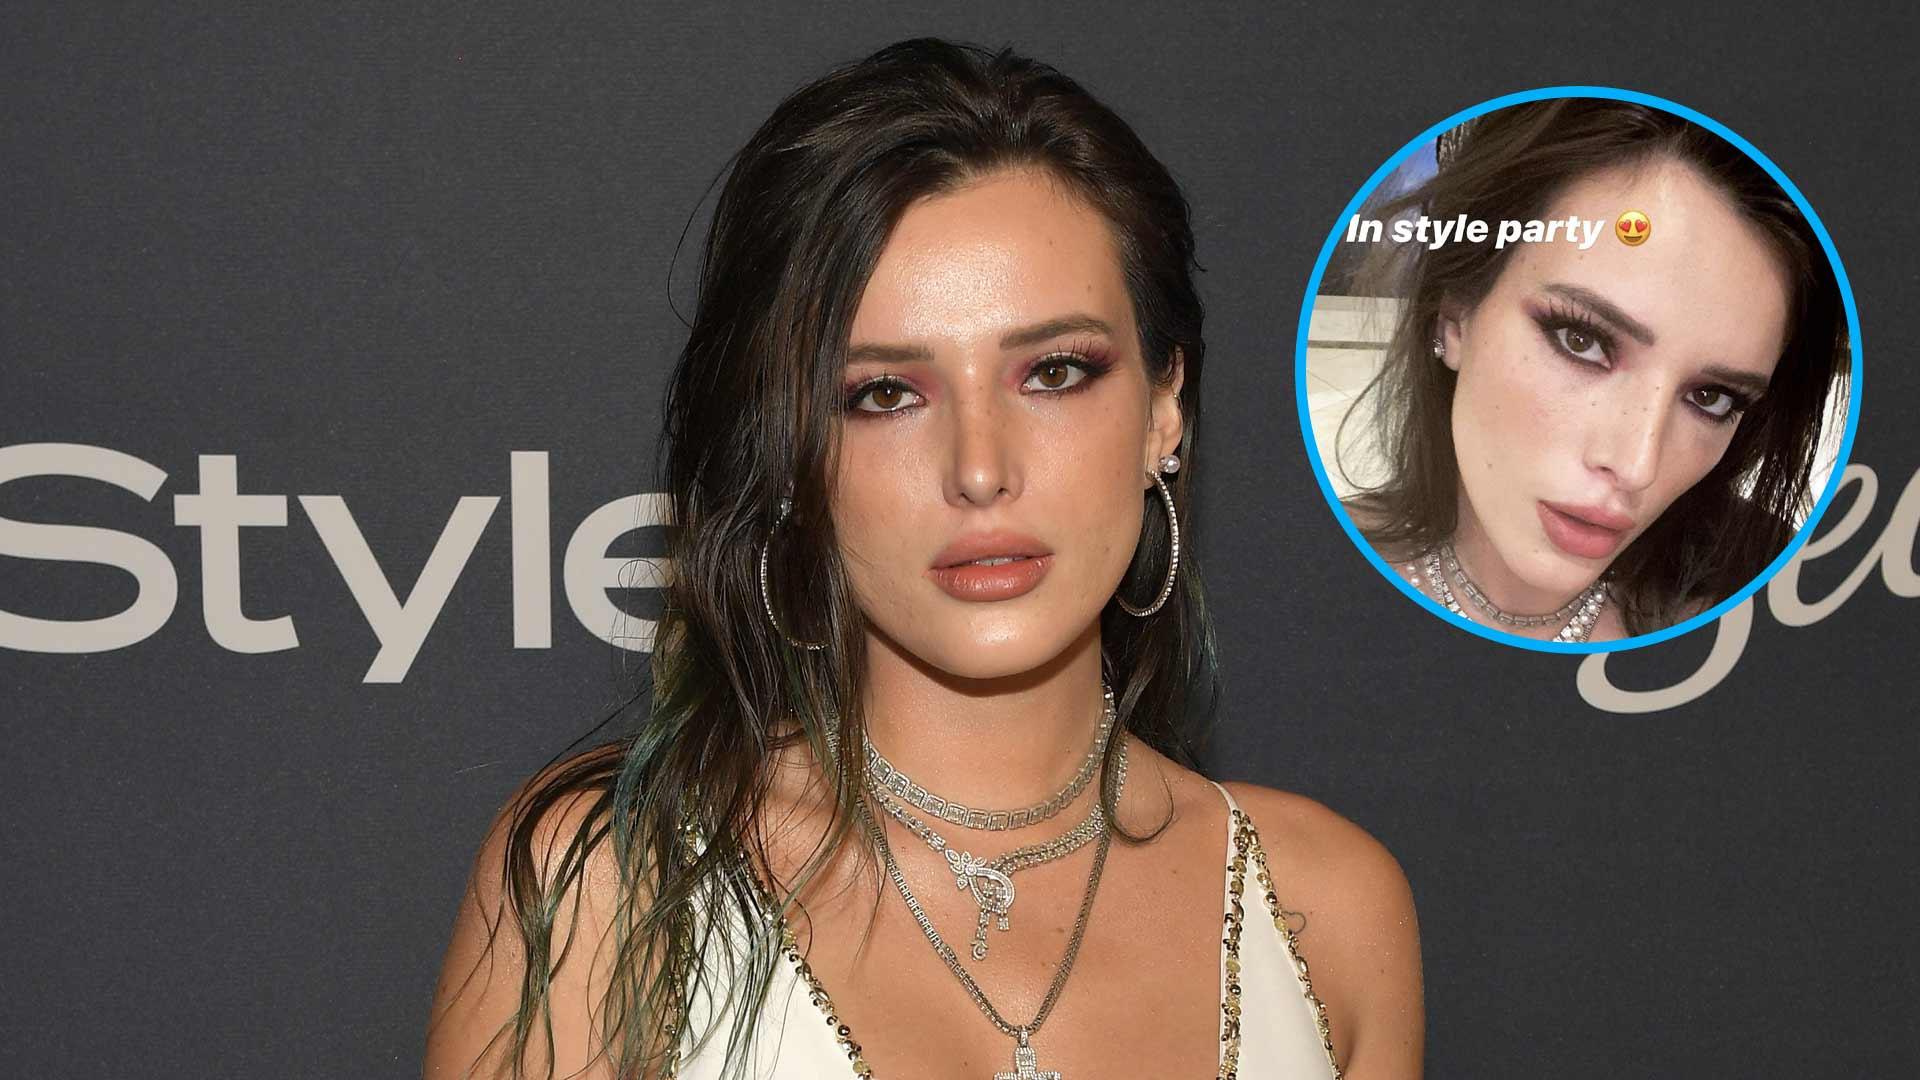 Get Ready With Me! Bella Thorne Teases Fans With Sultry Selfie Ahead of Golden Globes